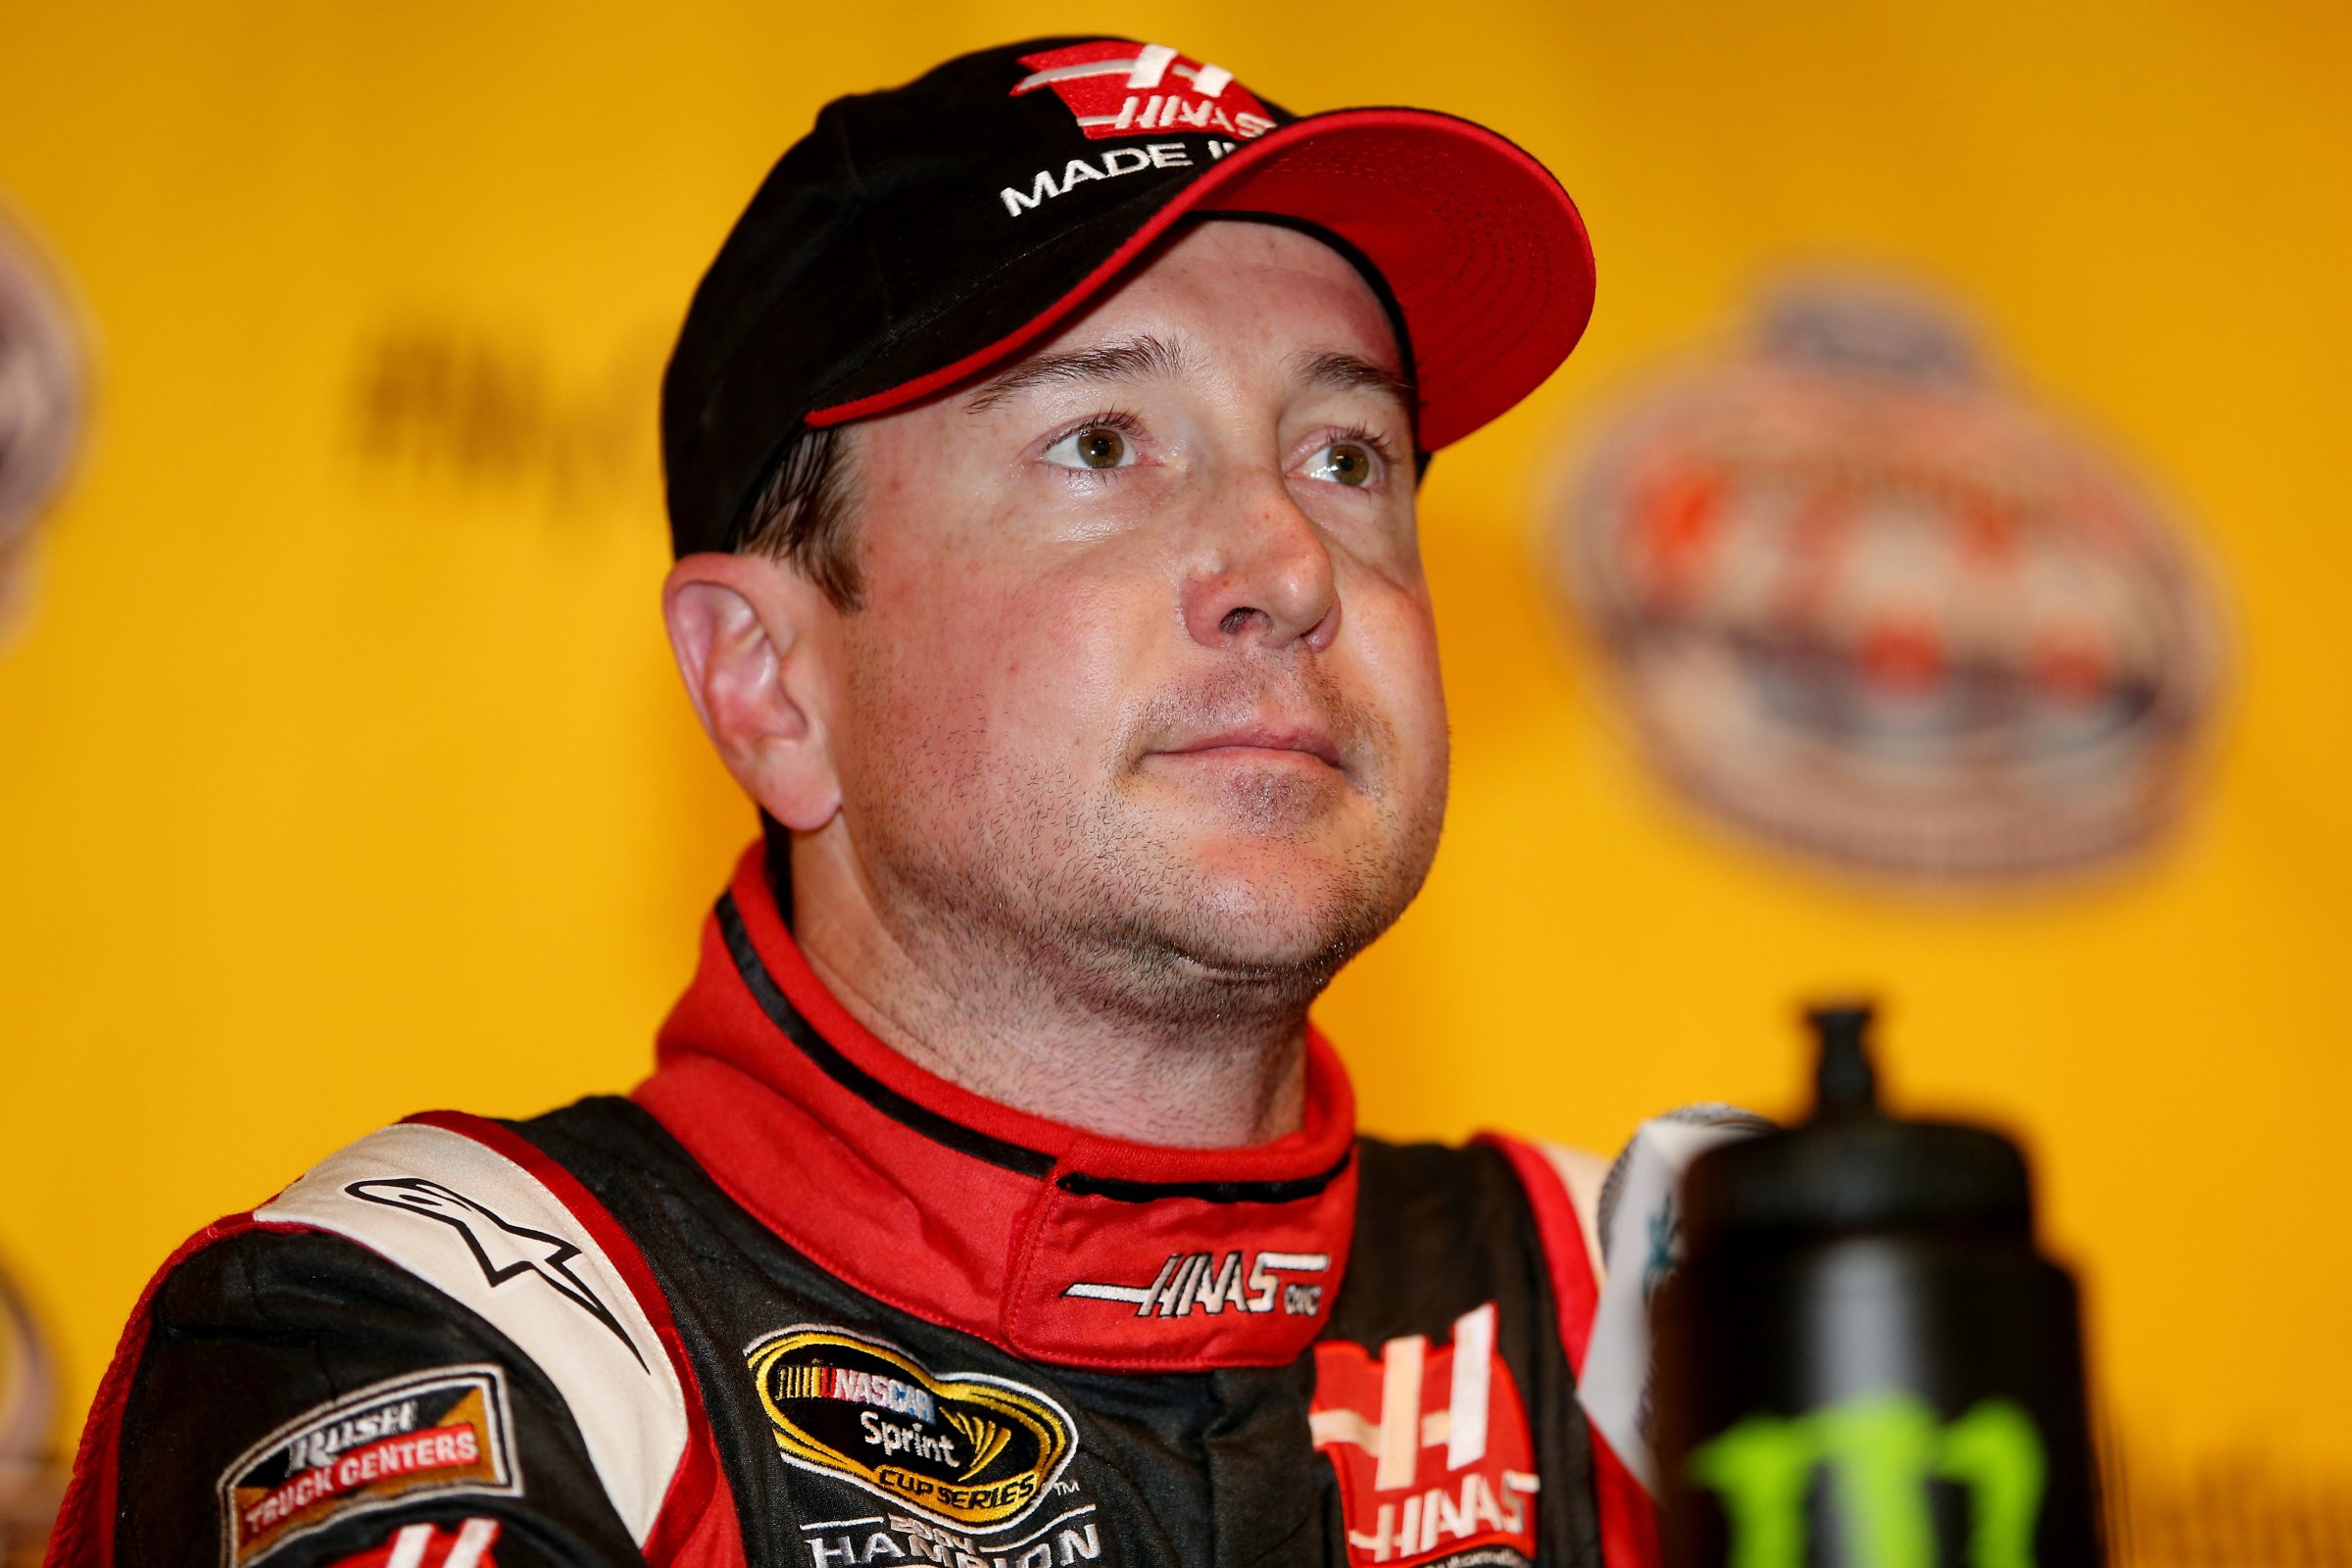 Kurt Busch speaks to the media after qualifying for the NASCAR Sprint Cup Series Ford EcoBoost 400 in Homestead, Fla. on Nov. 14, 2014.